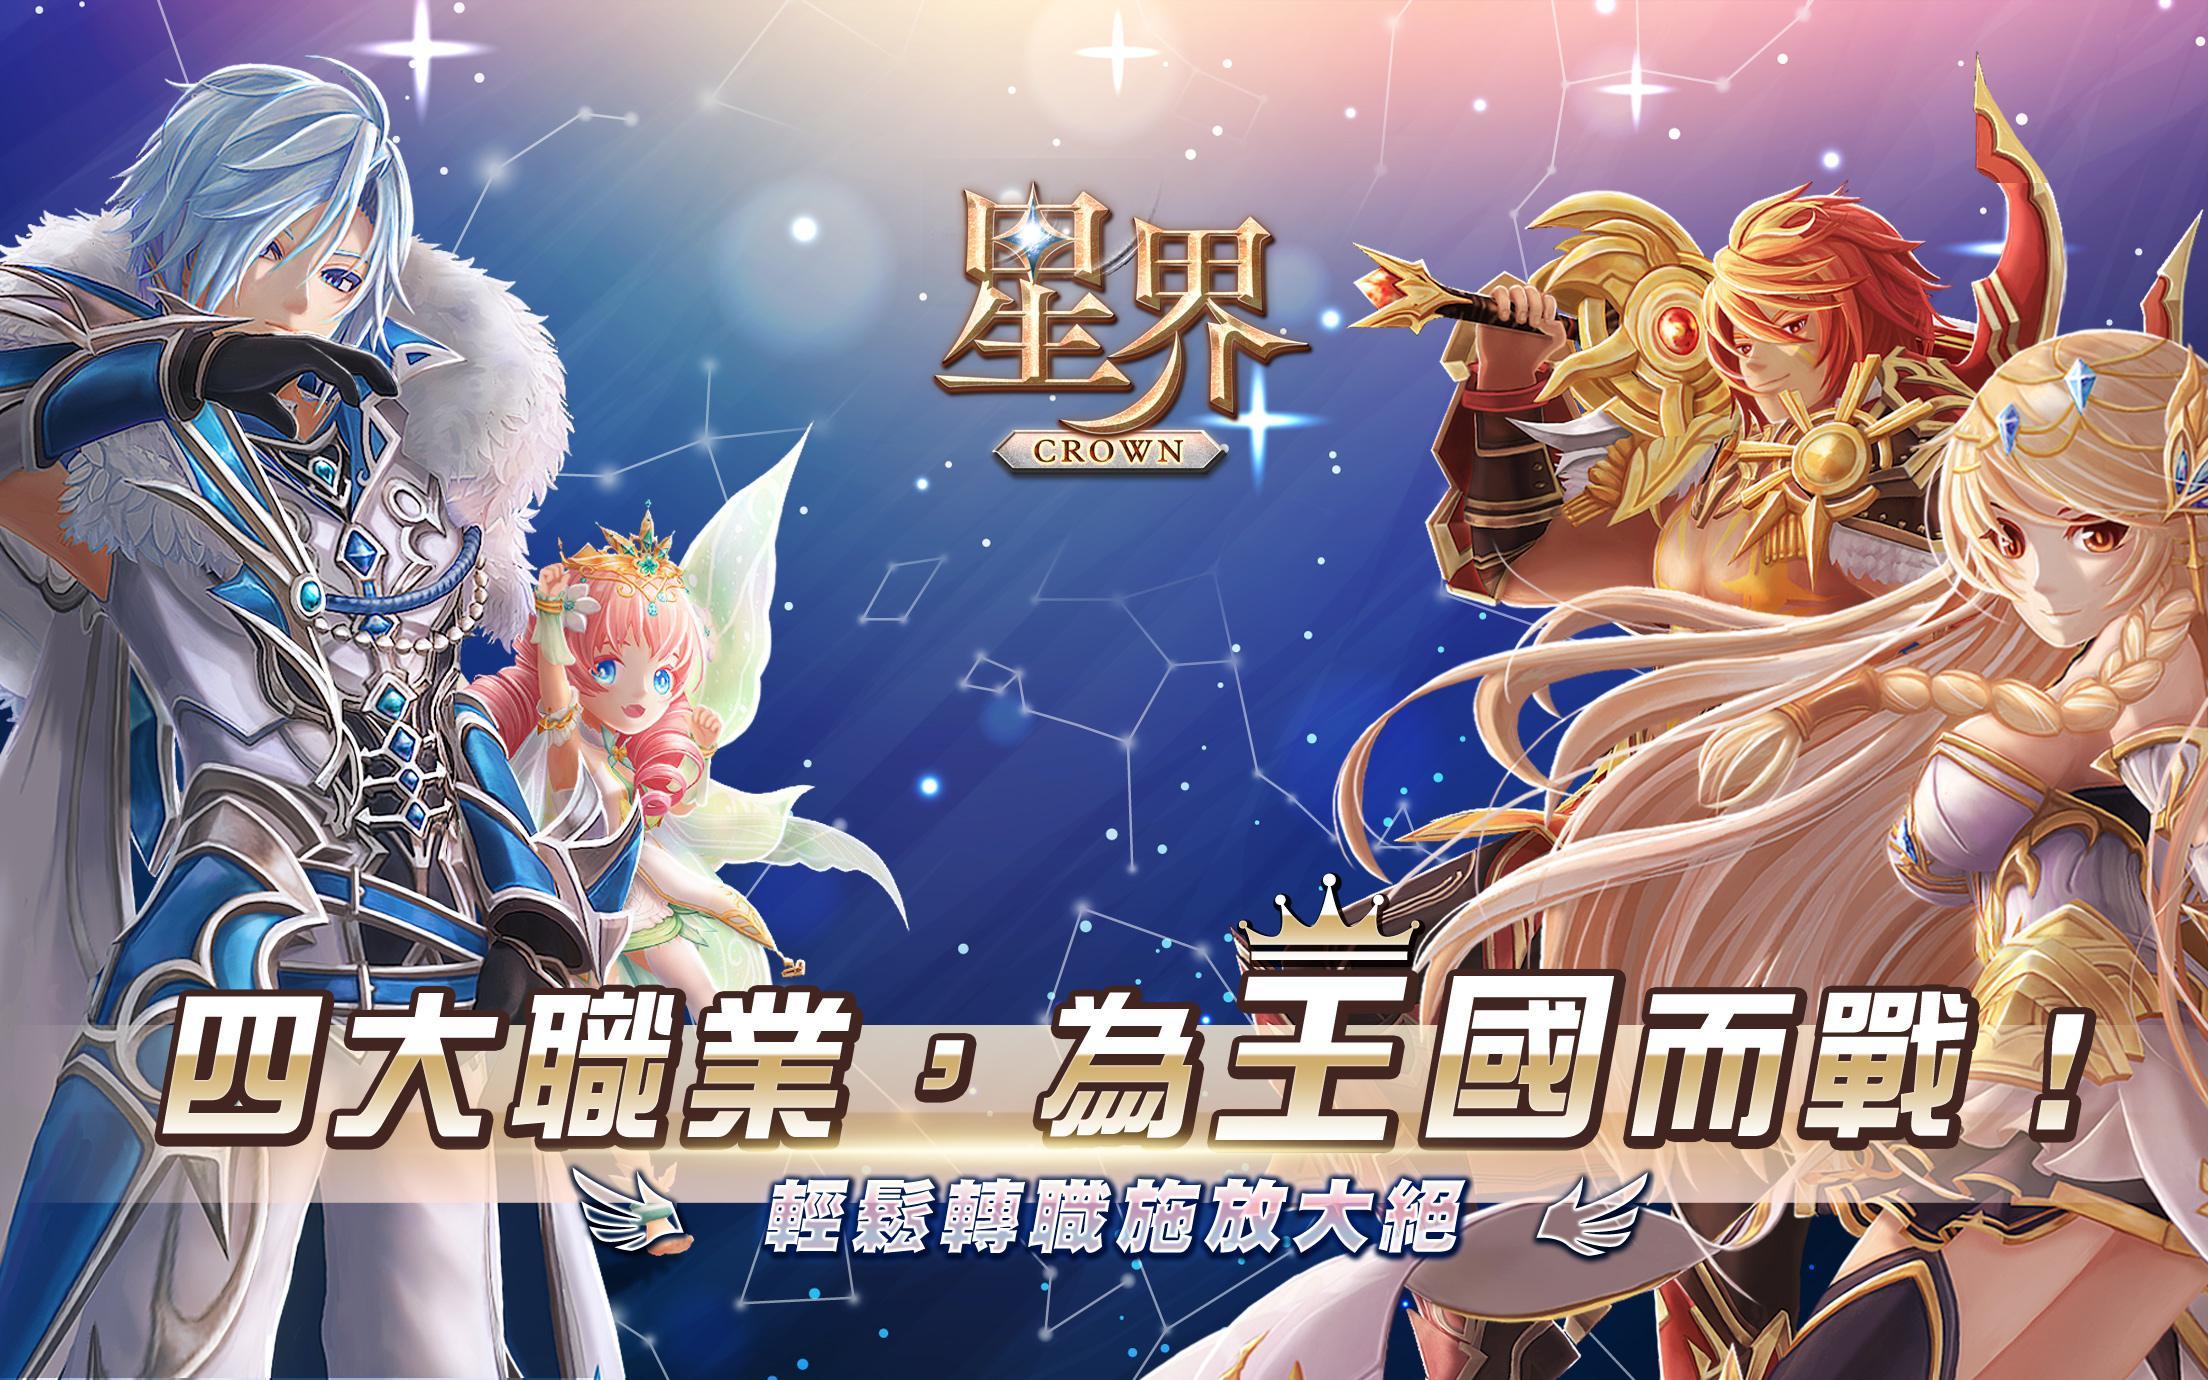 Banner of Astral: The Crown (versione per Hong Kong e Macao) 11.0.1